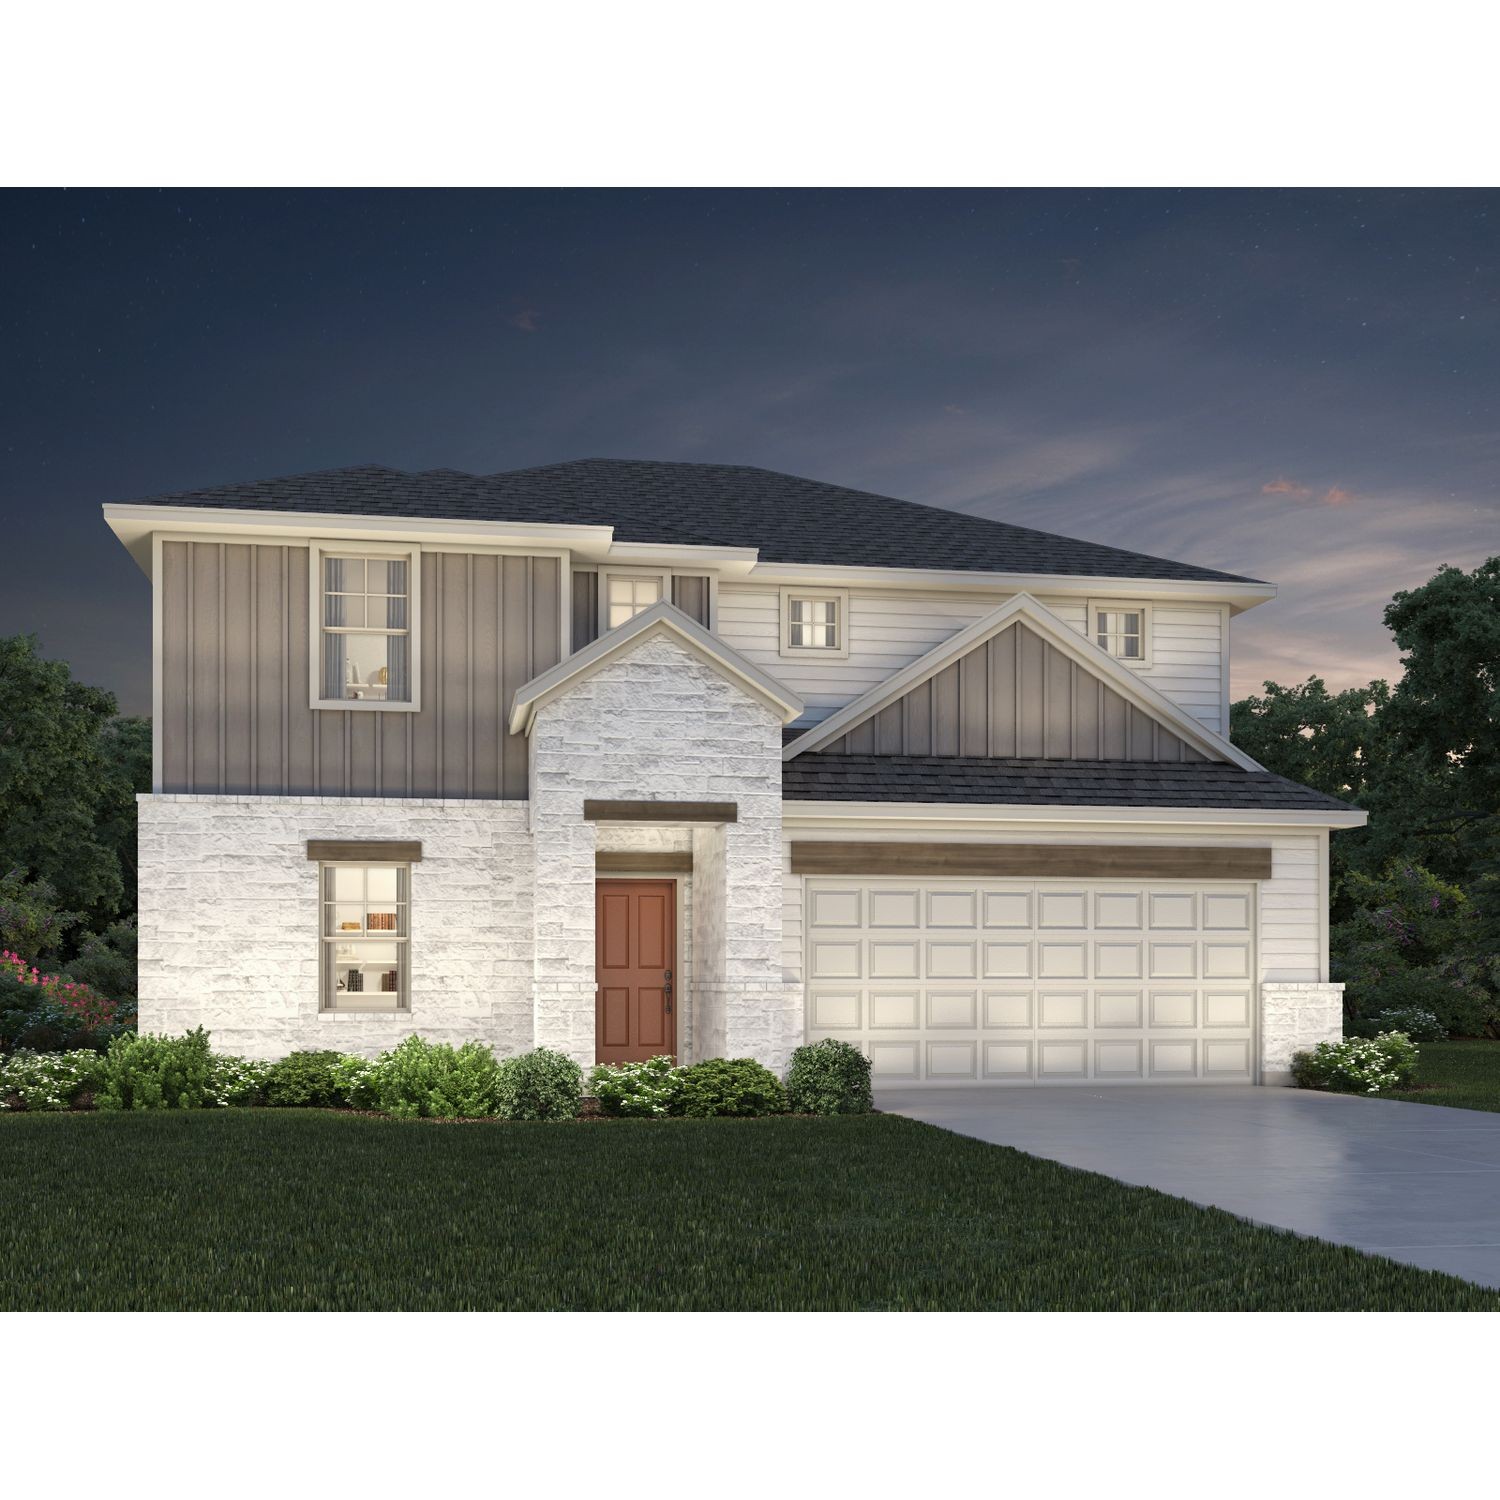 12. Riverbend At Double Eagle - Boulevard Collection